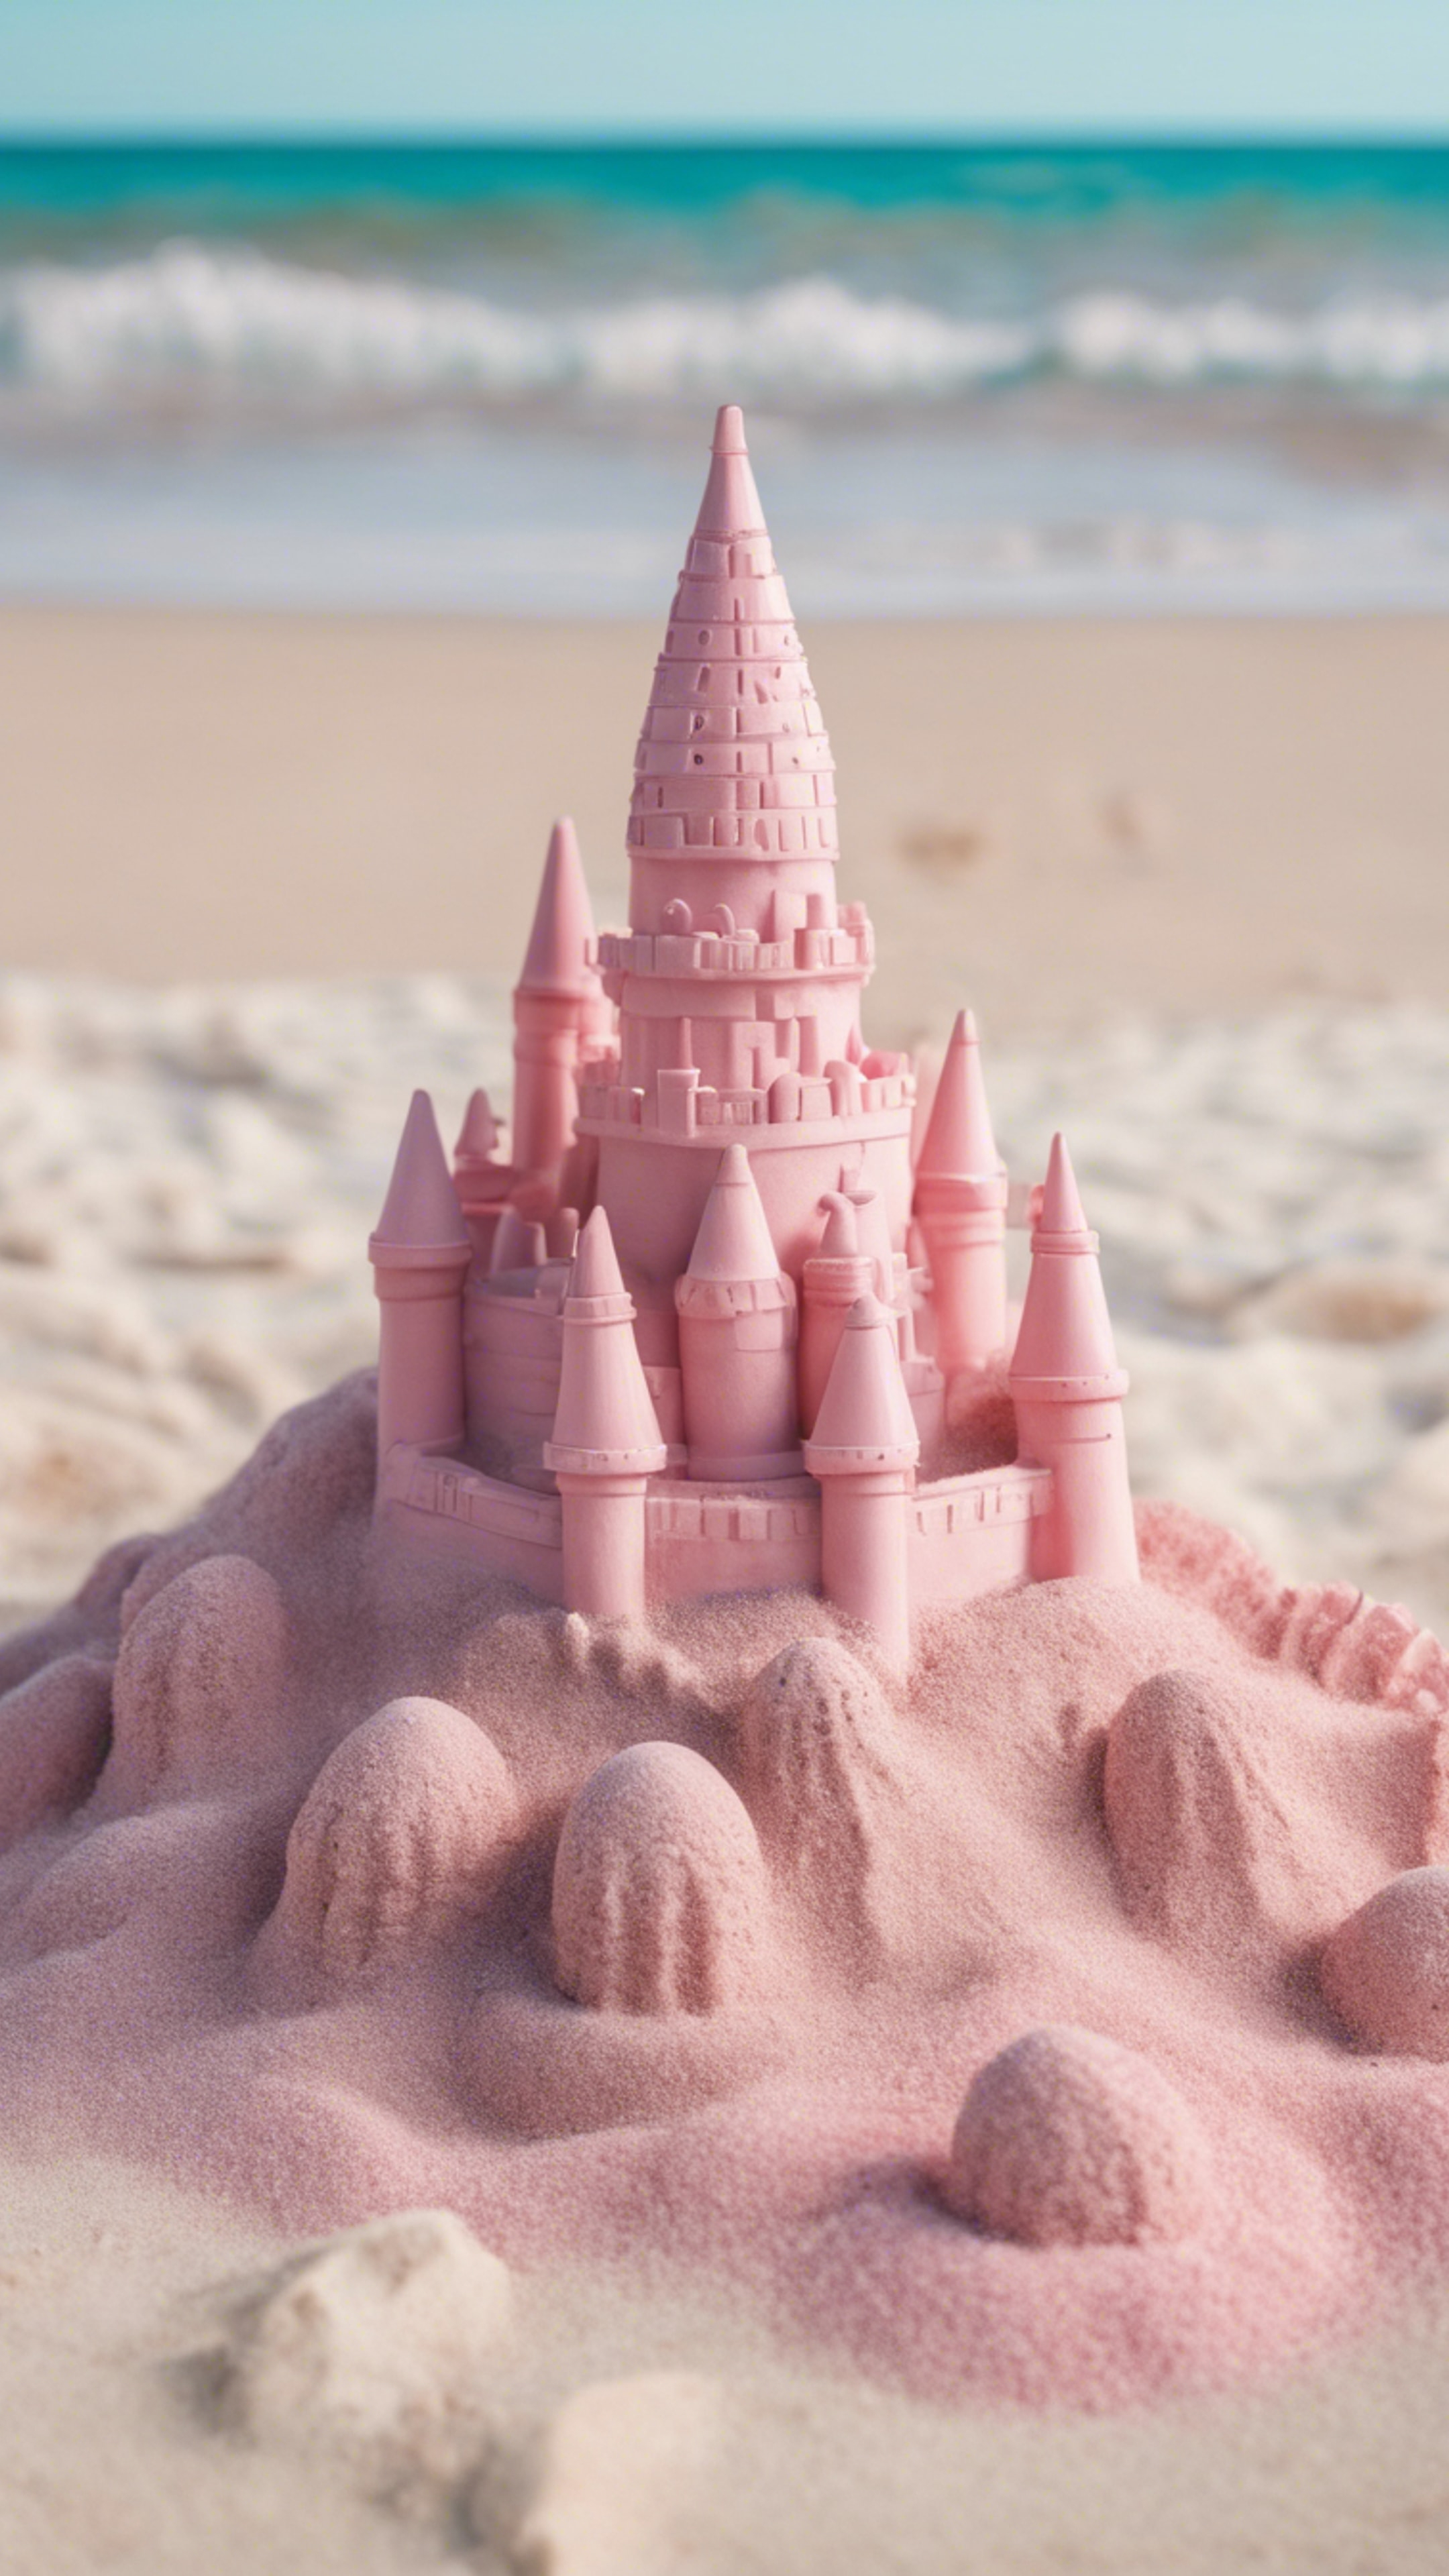 An intricate preppy pastel pink sandcastle on an idyllic beach with clear azure waters.壁紙[55e256d408524d5fa872]